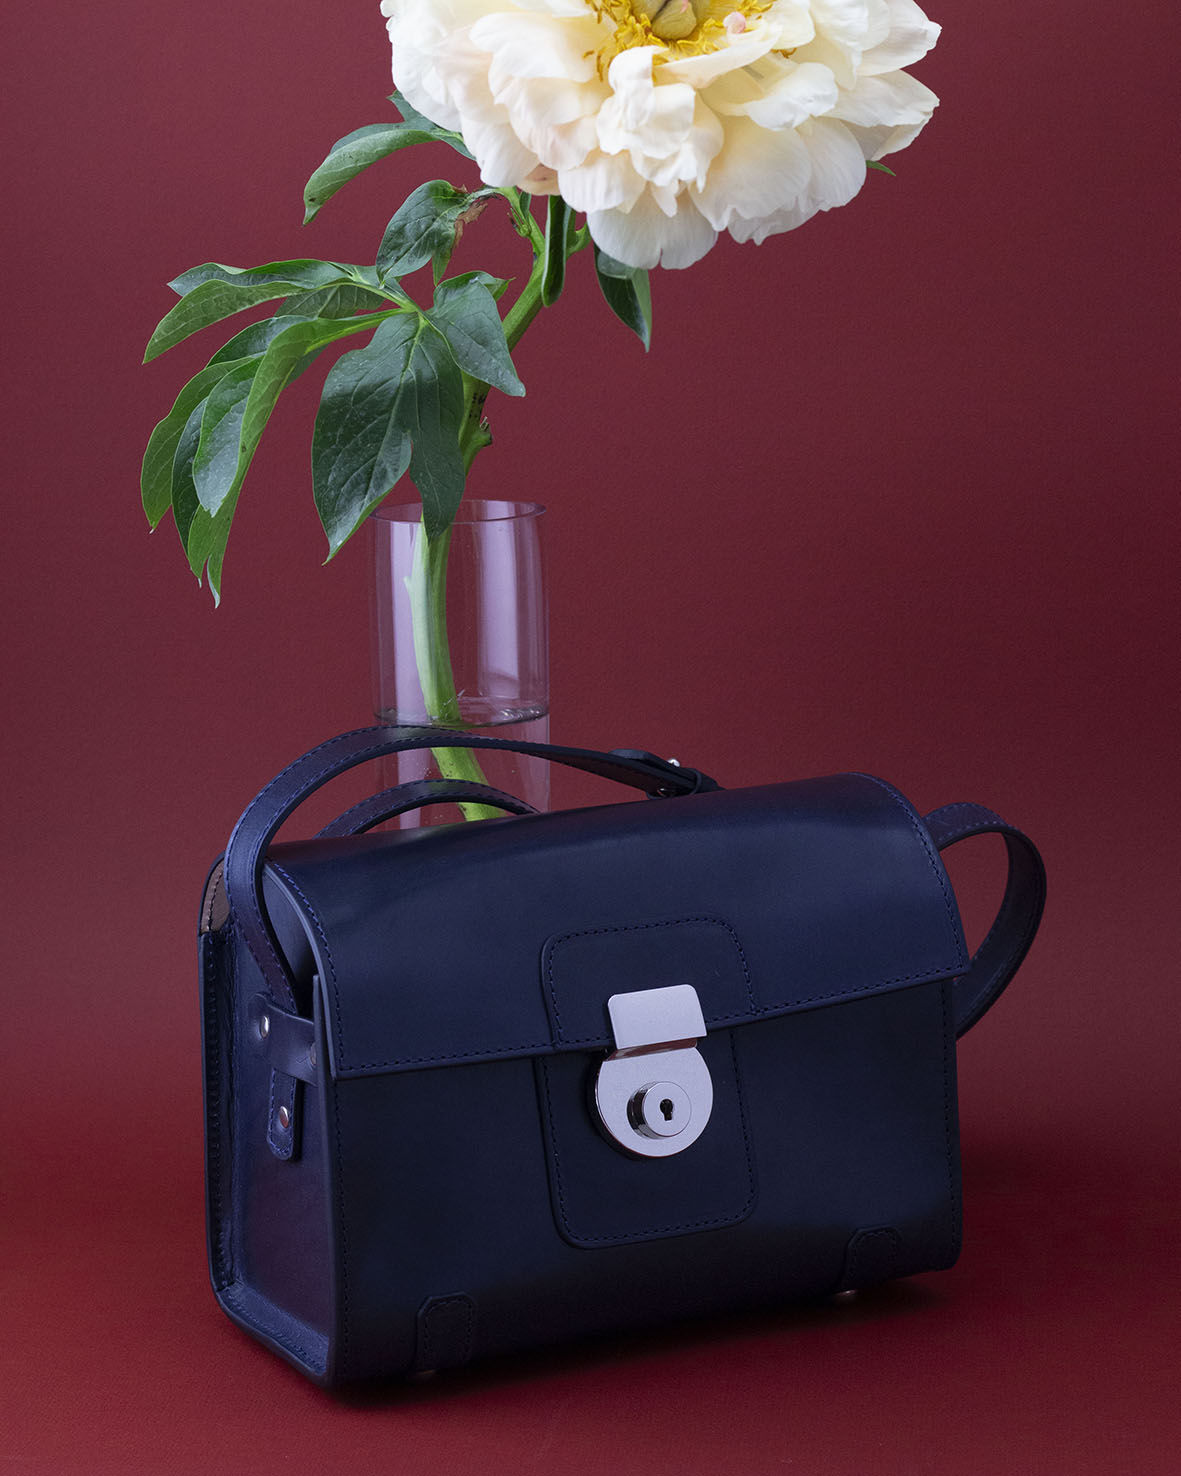 Dior Gives Us An Intimate Look At Their New Lady D-Joy bag